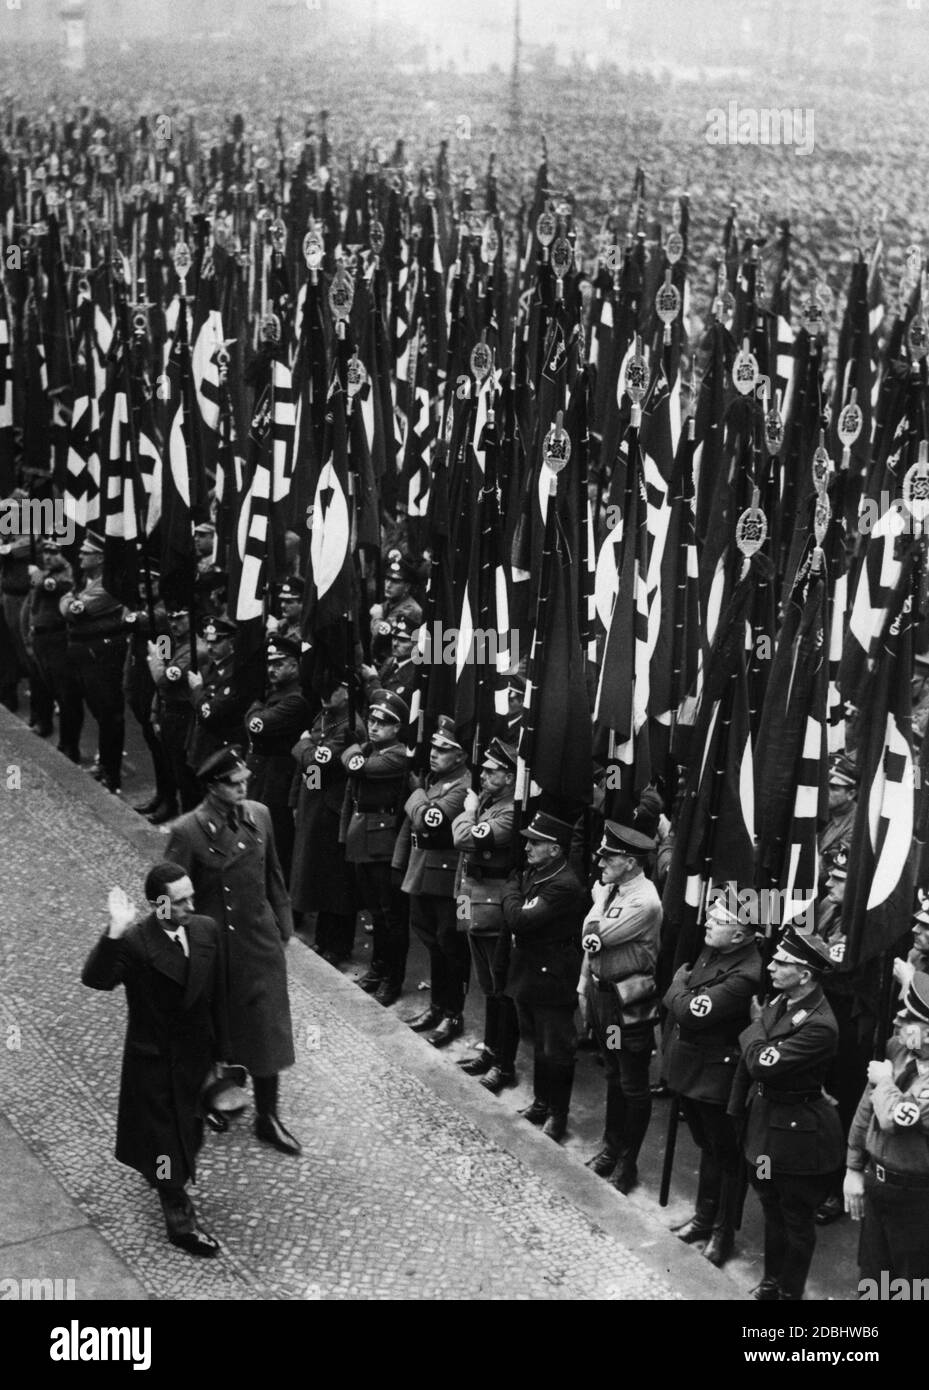 Joseph Goebbels and State Councillor Artur Goerlitzer inspect the flag formation in the Lustgarten in Berlin. (undated photo) Stock Photo